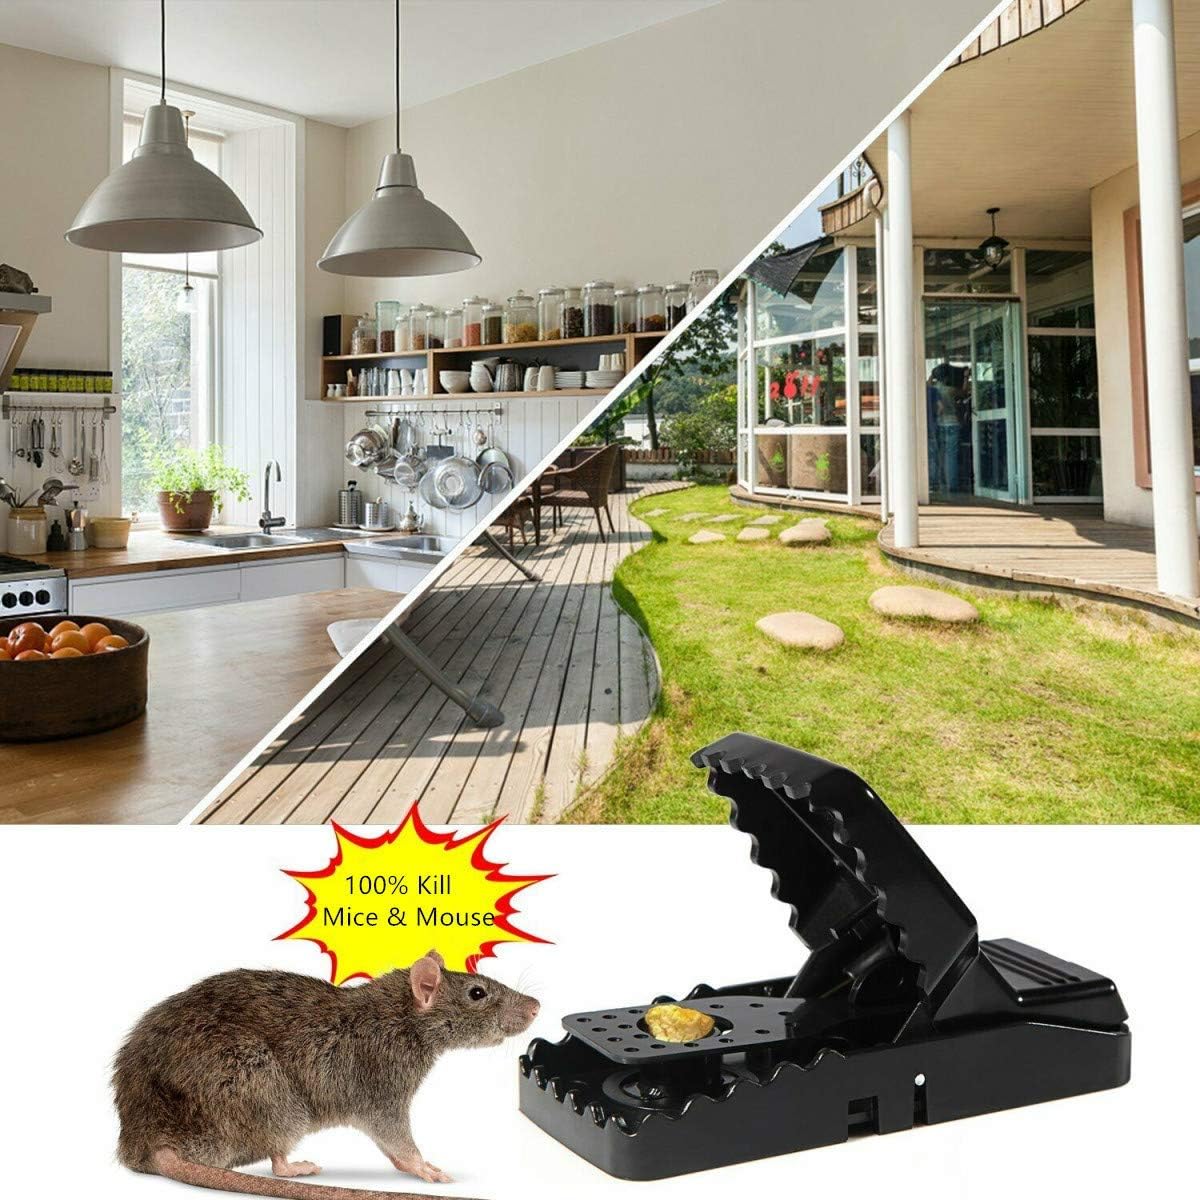 pack of two Universal Mouse Catcher, Indoor Reusable Rat Trap